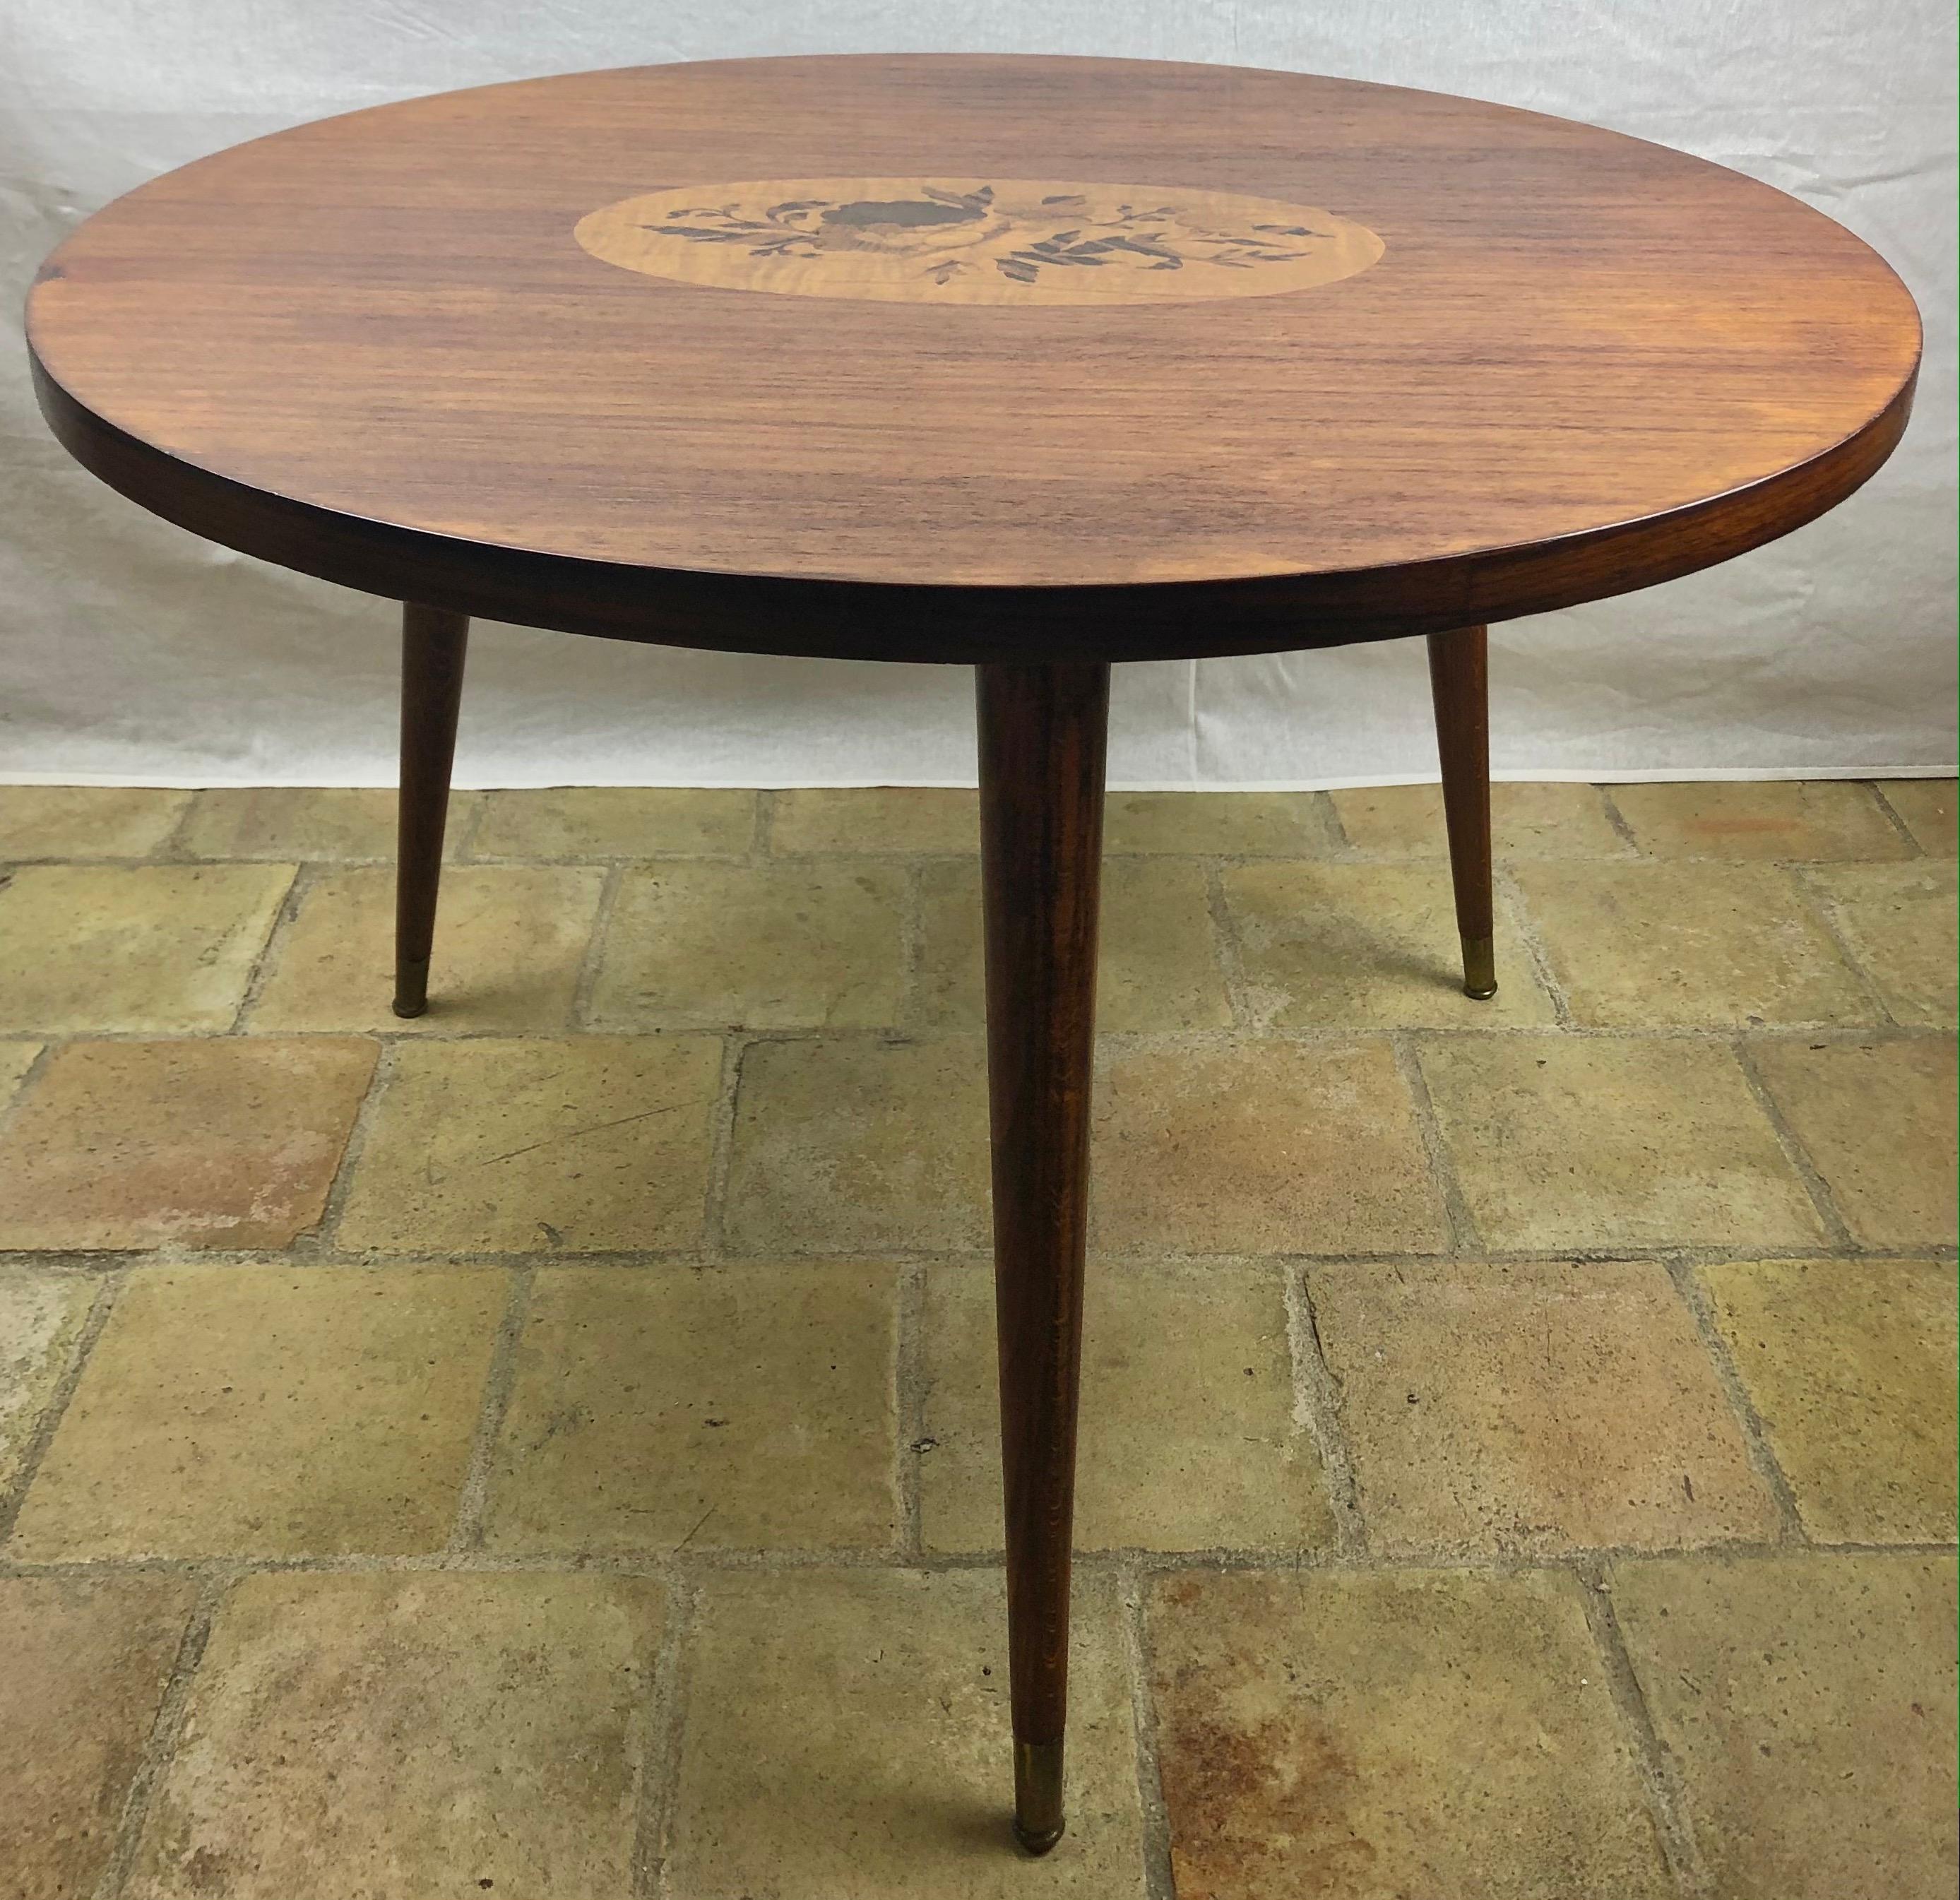 20th Century French Art Deco Style Round Wooden Cocktail or Side Table with Marquetry Center For Sale